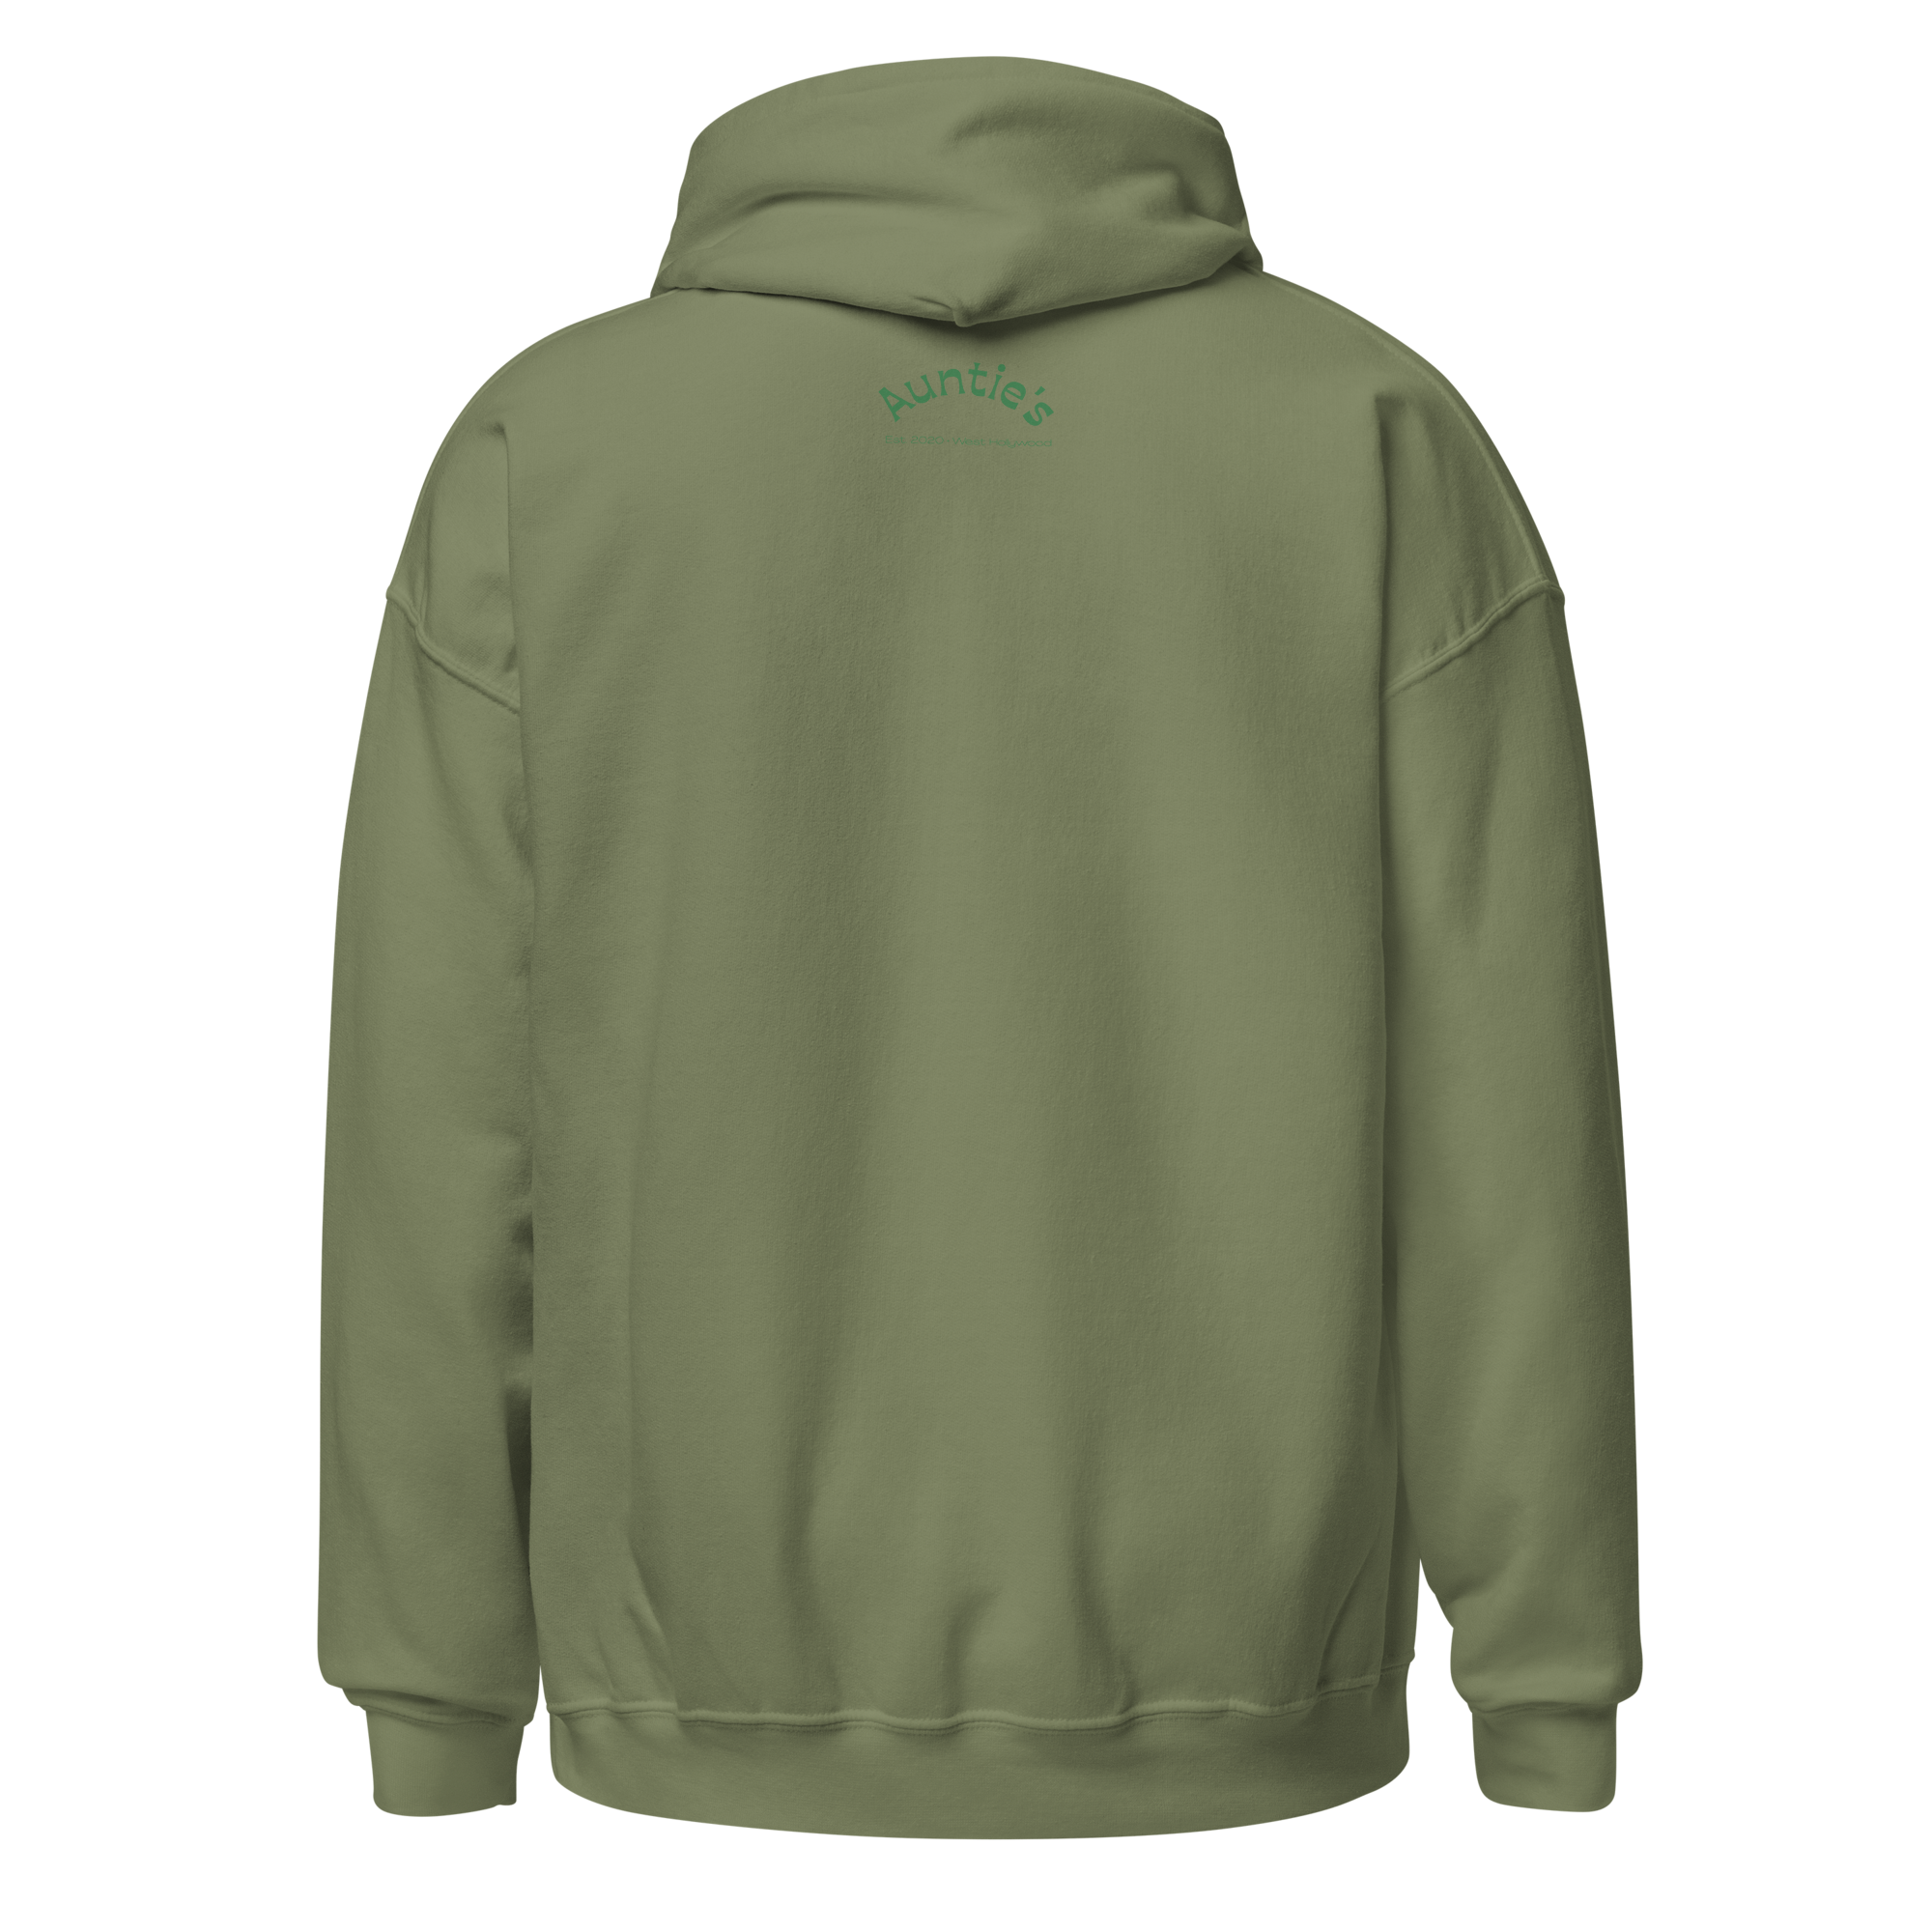 Somethin' from Nothin' Hoodie